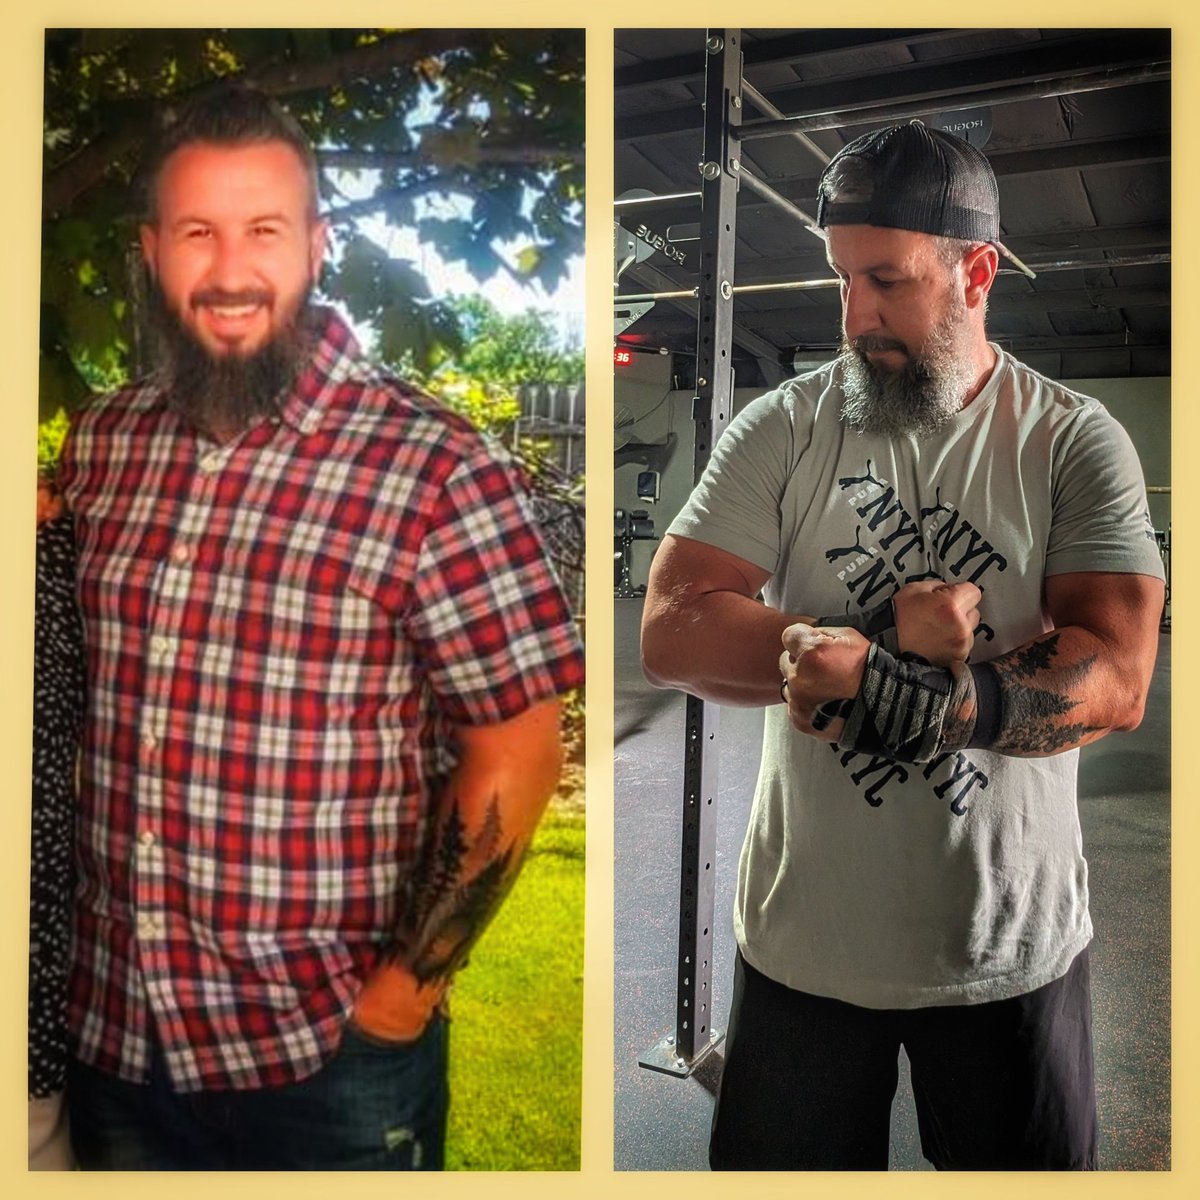 Here's my 1 year transformation at 41. Maybe this will give some Dad-spirarion to some other dads out there! Get active so you can be active with your kids!